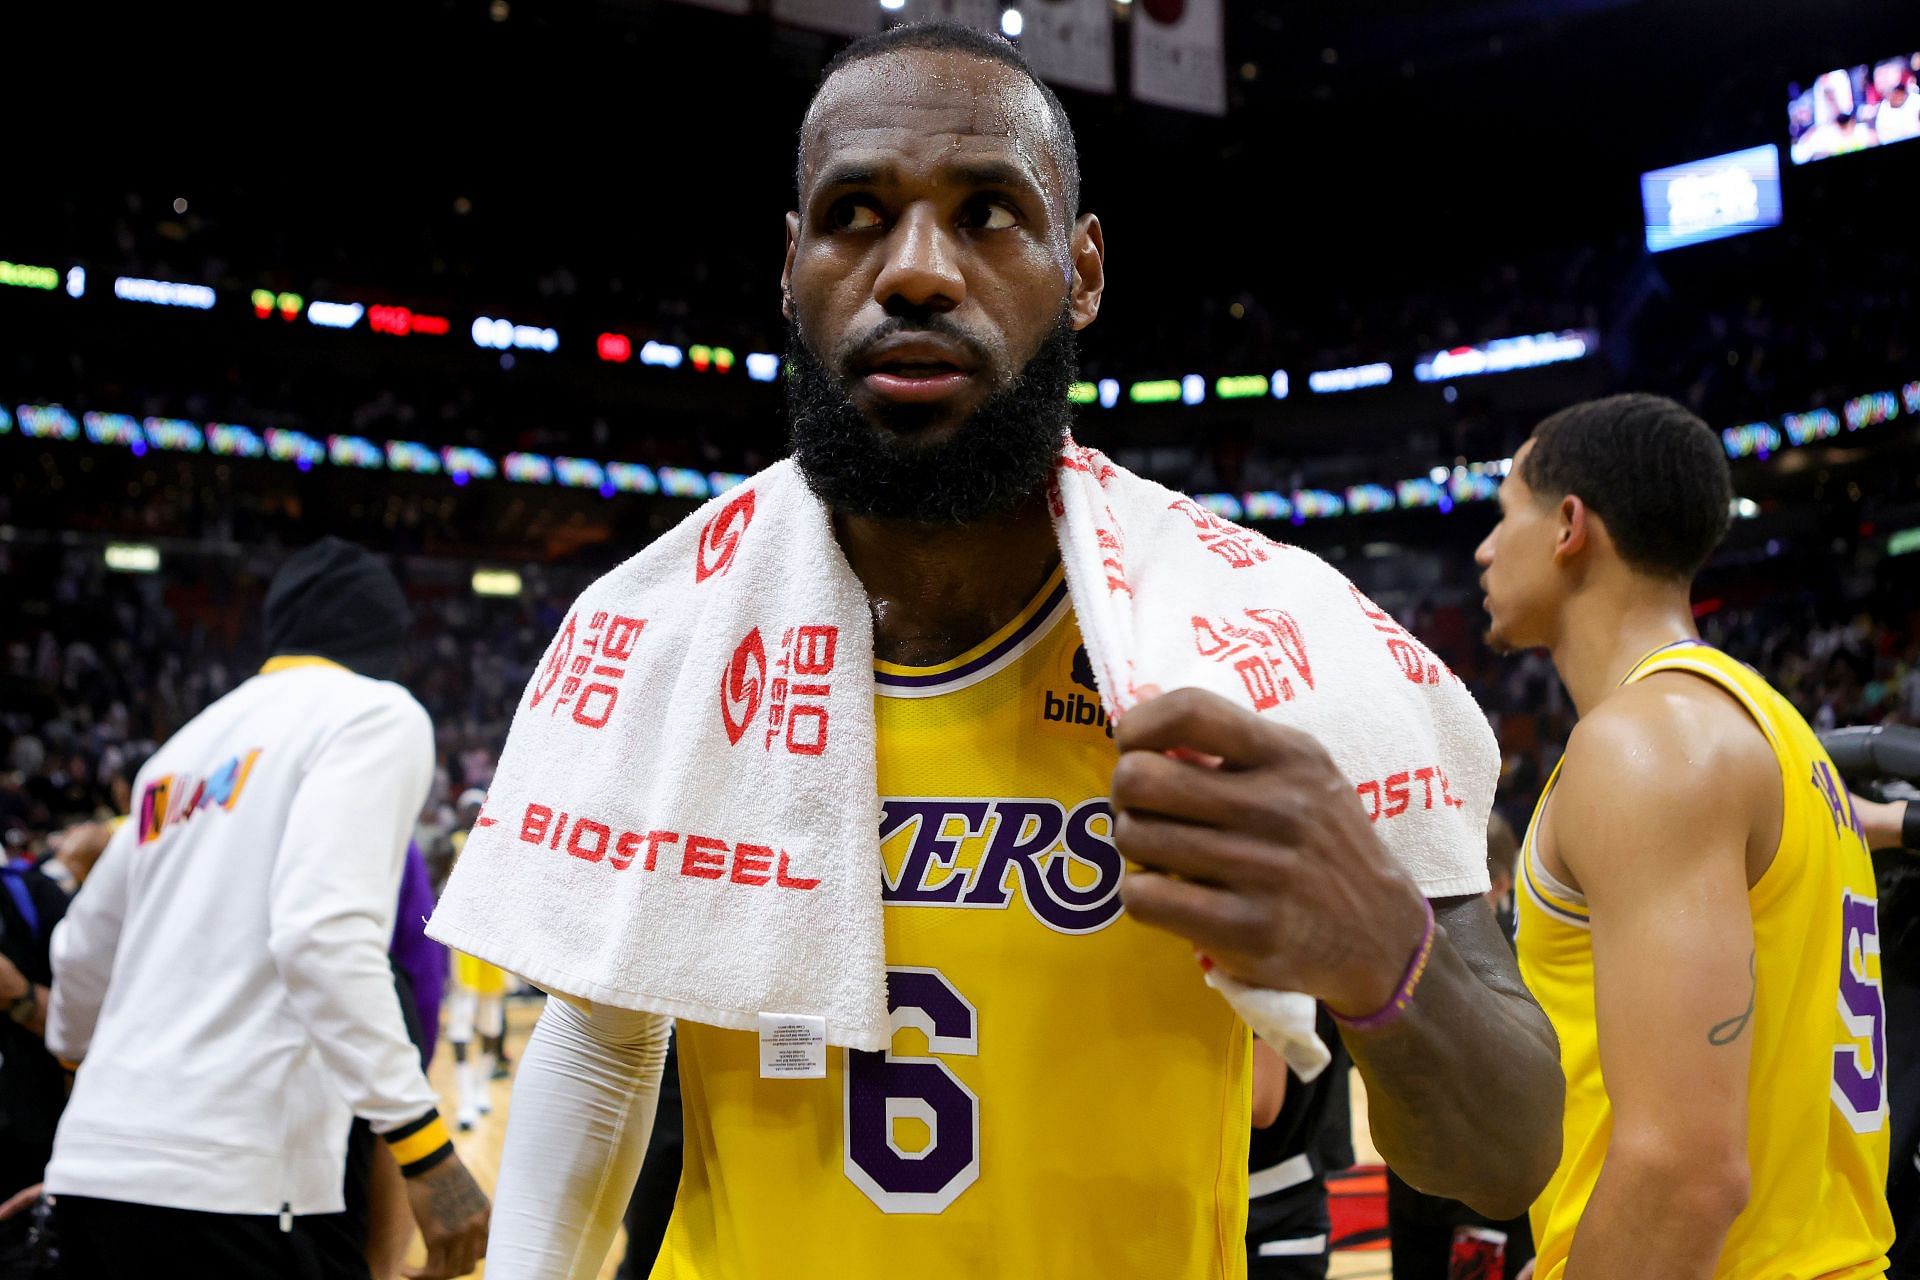 LeBron James on his Lakers future: I came here to win a title, but